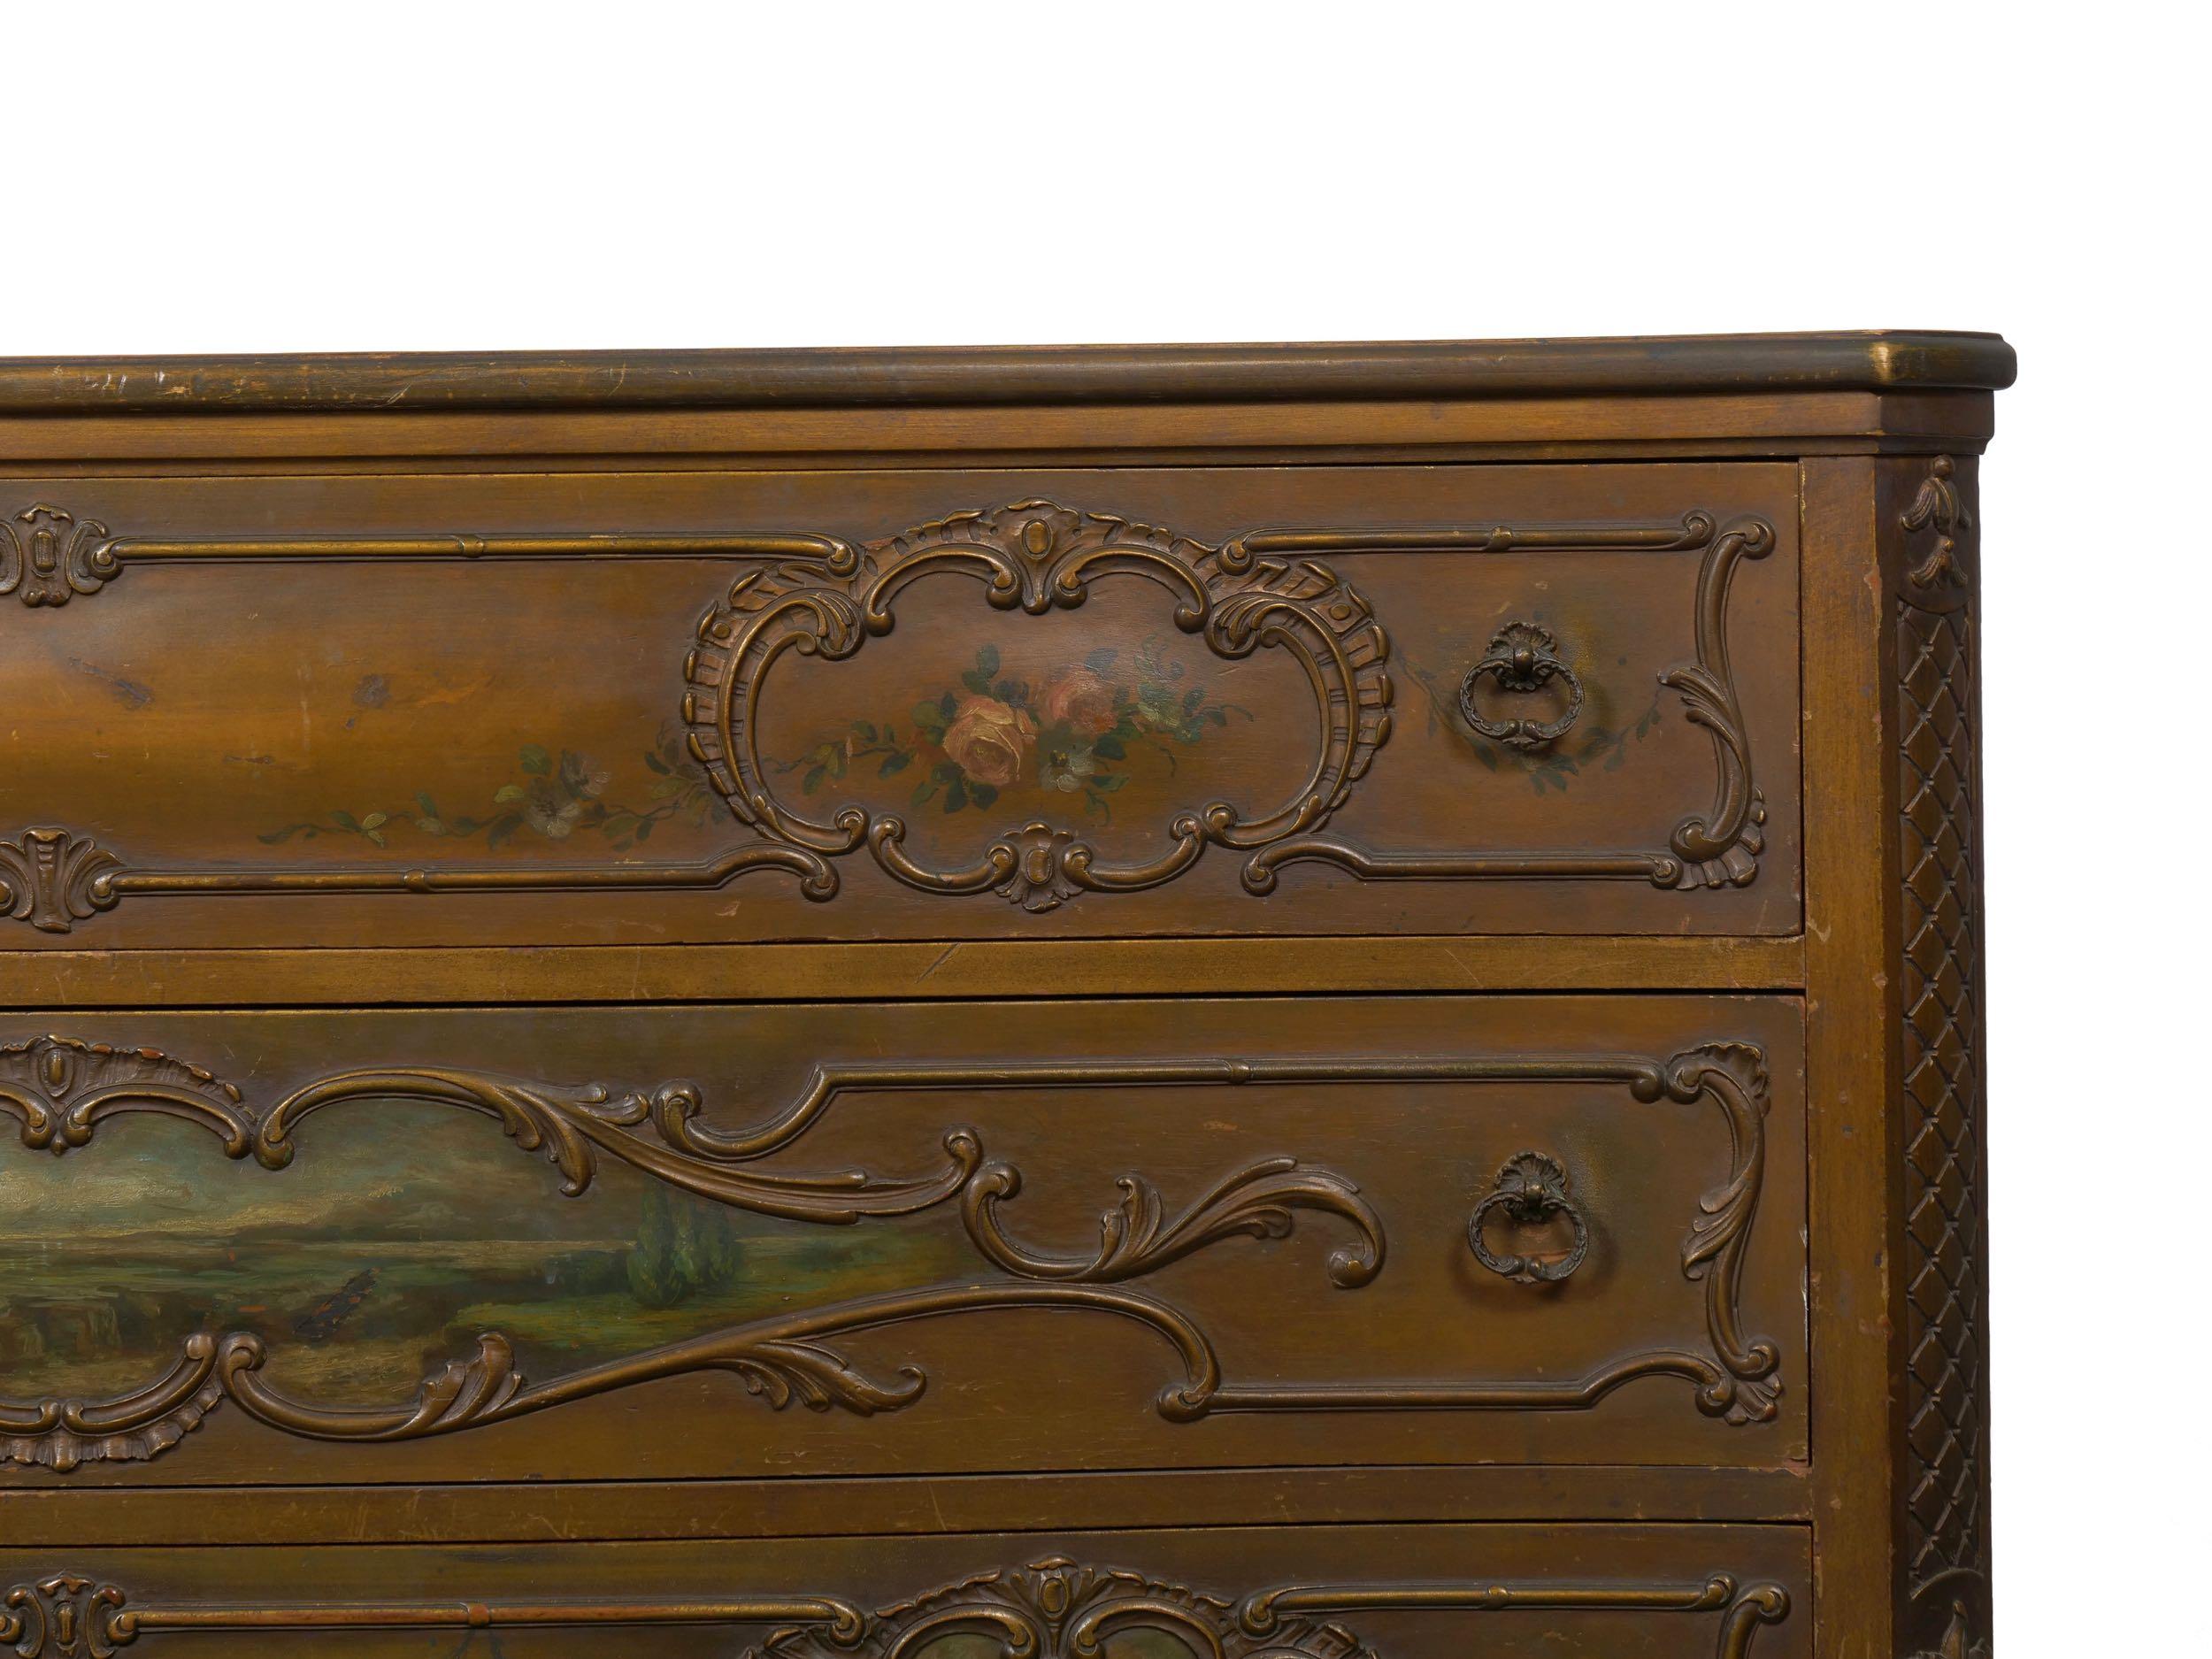 Wood Rococo Revival Antique Painted Commode Chest of Drawers, Early 20th Century